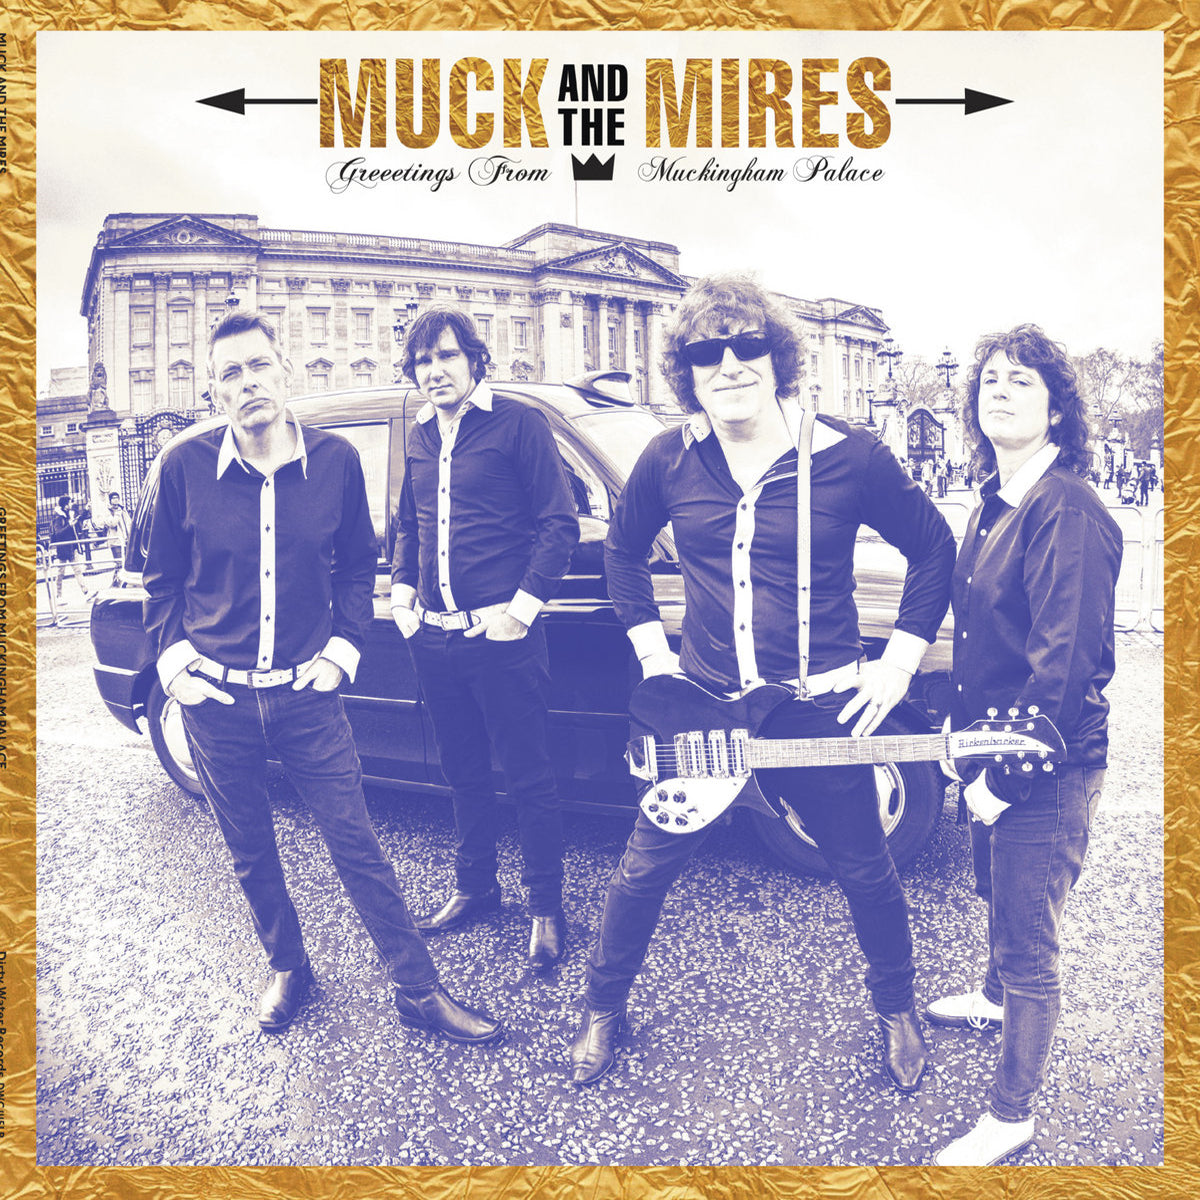 Muck And The Mires- Greeting From Muckingham Palace LP